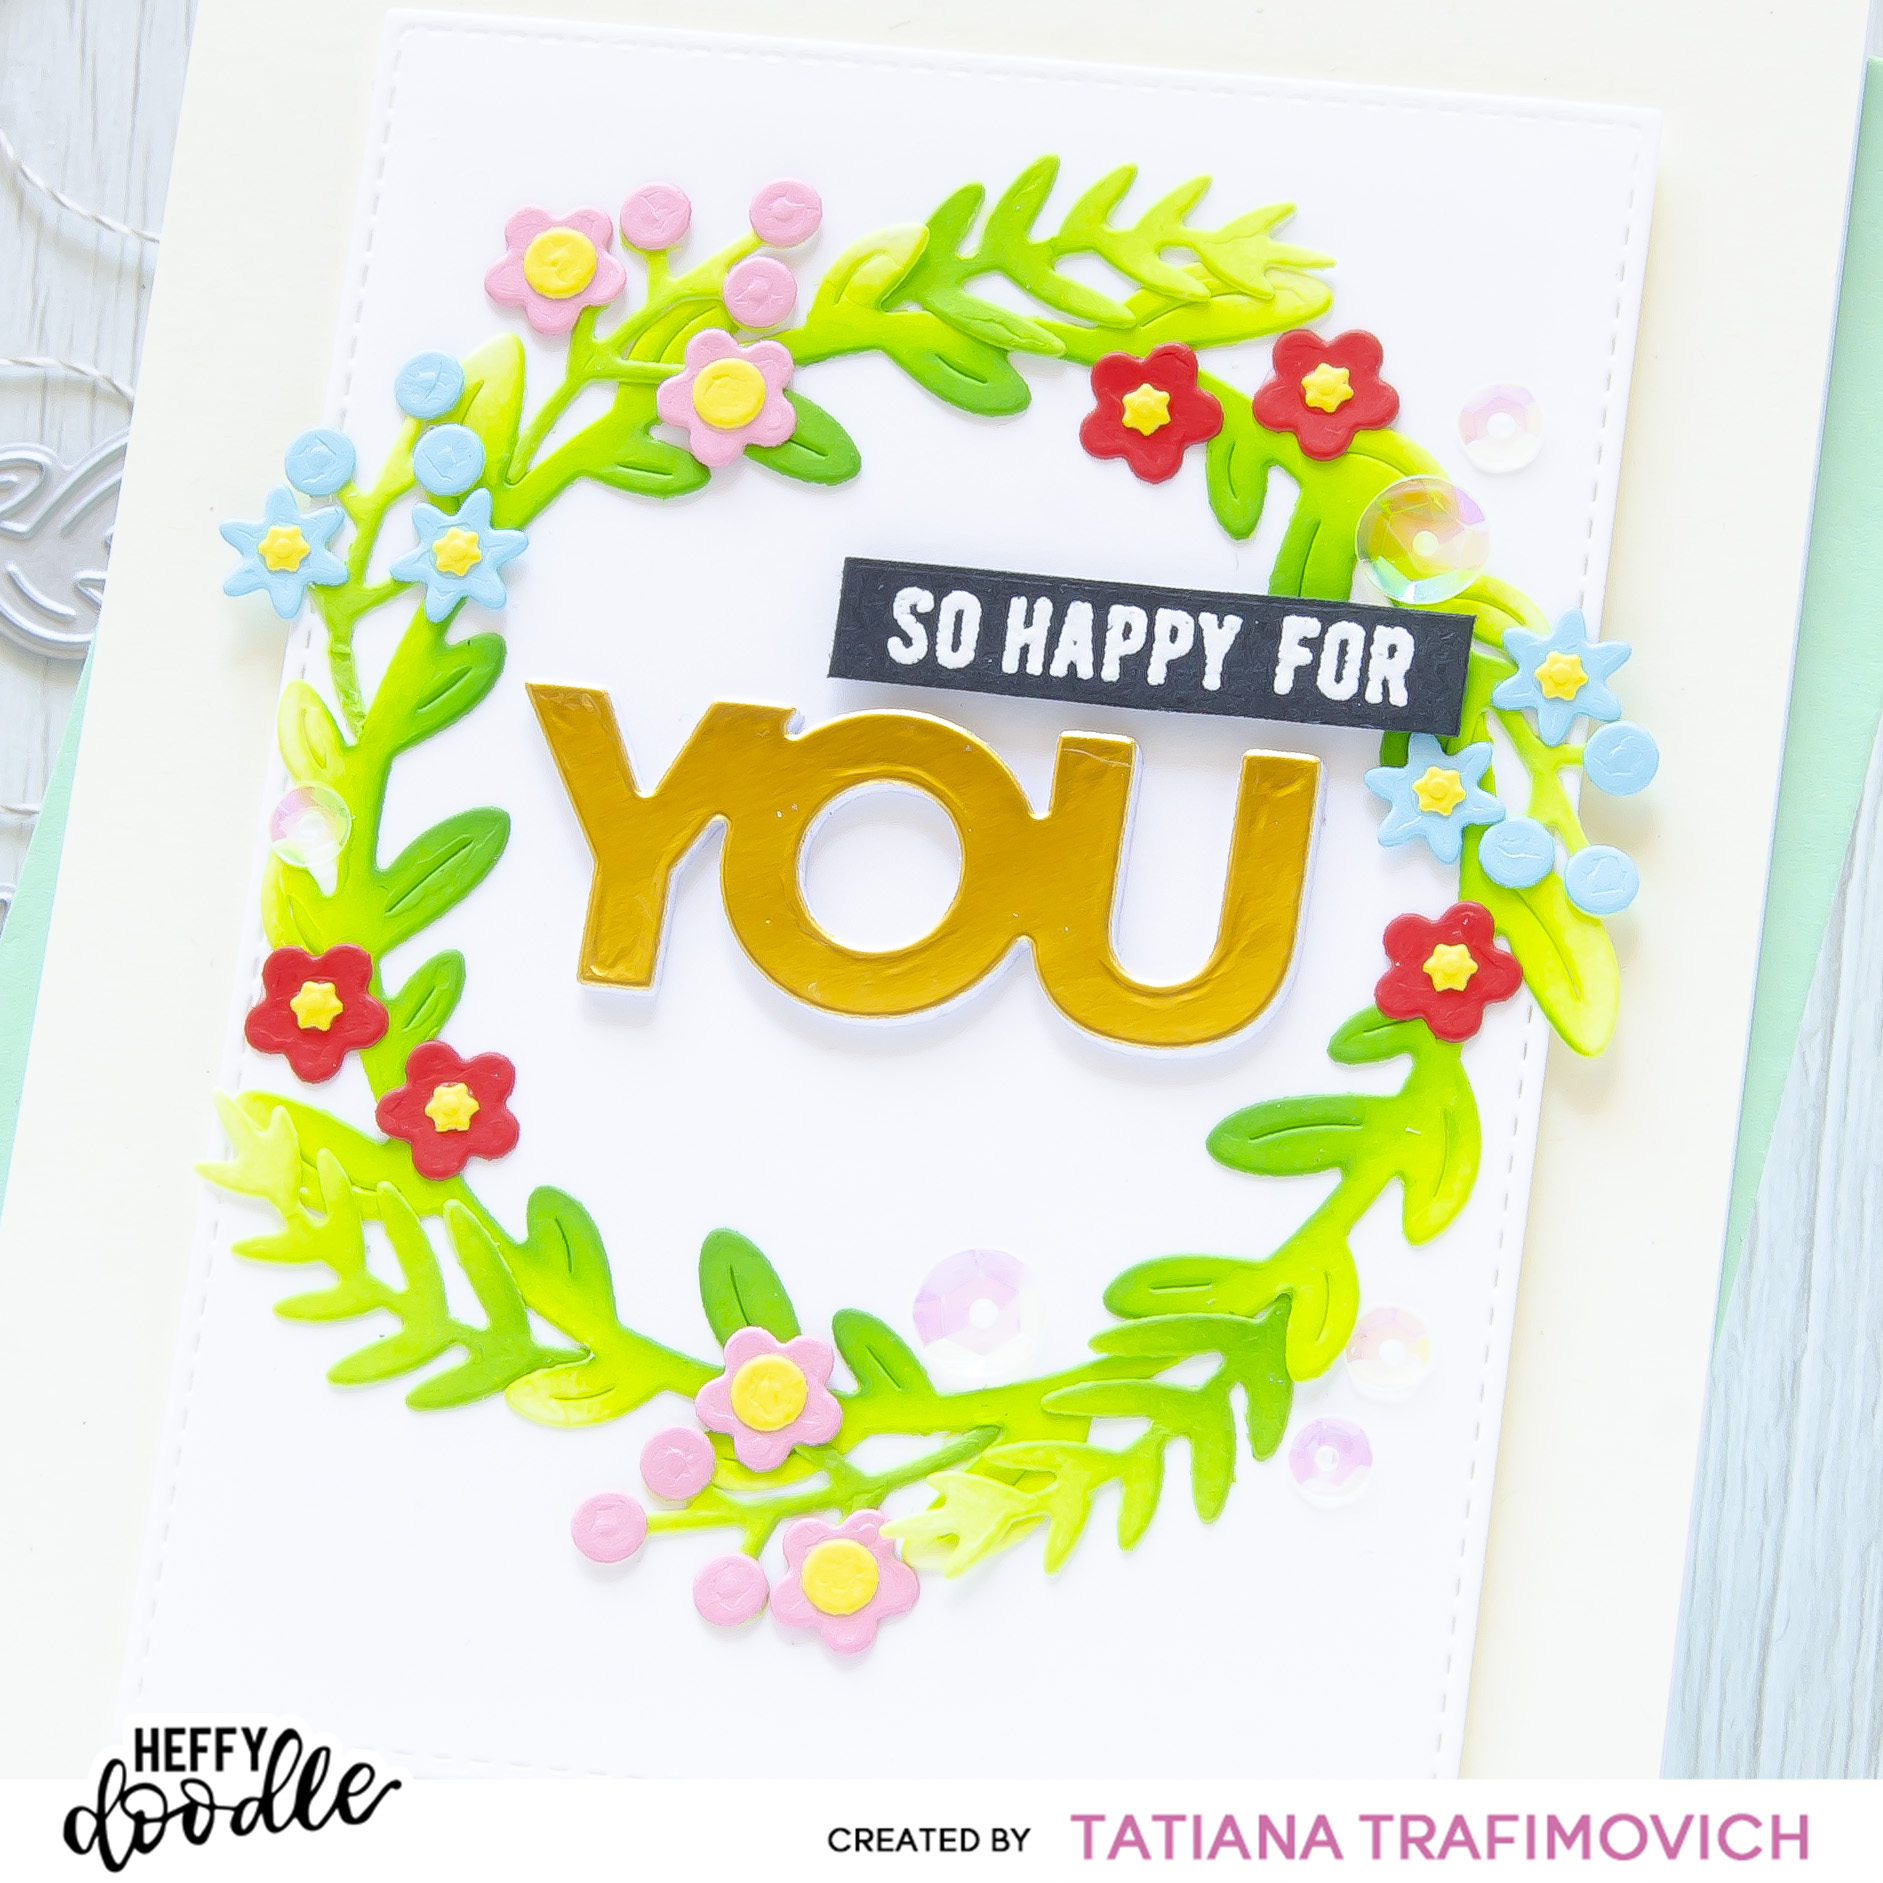 So Happy For You #handmade card by Tatiana Trafimovich #tatianacraftandart - stamps and dies by Heffy Doodle #heffydoodle